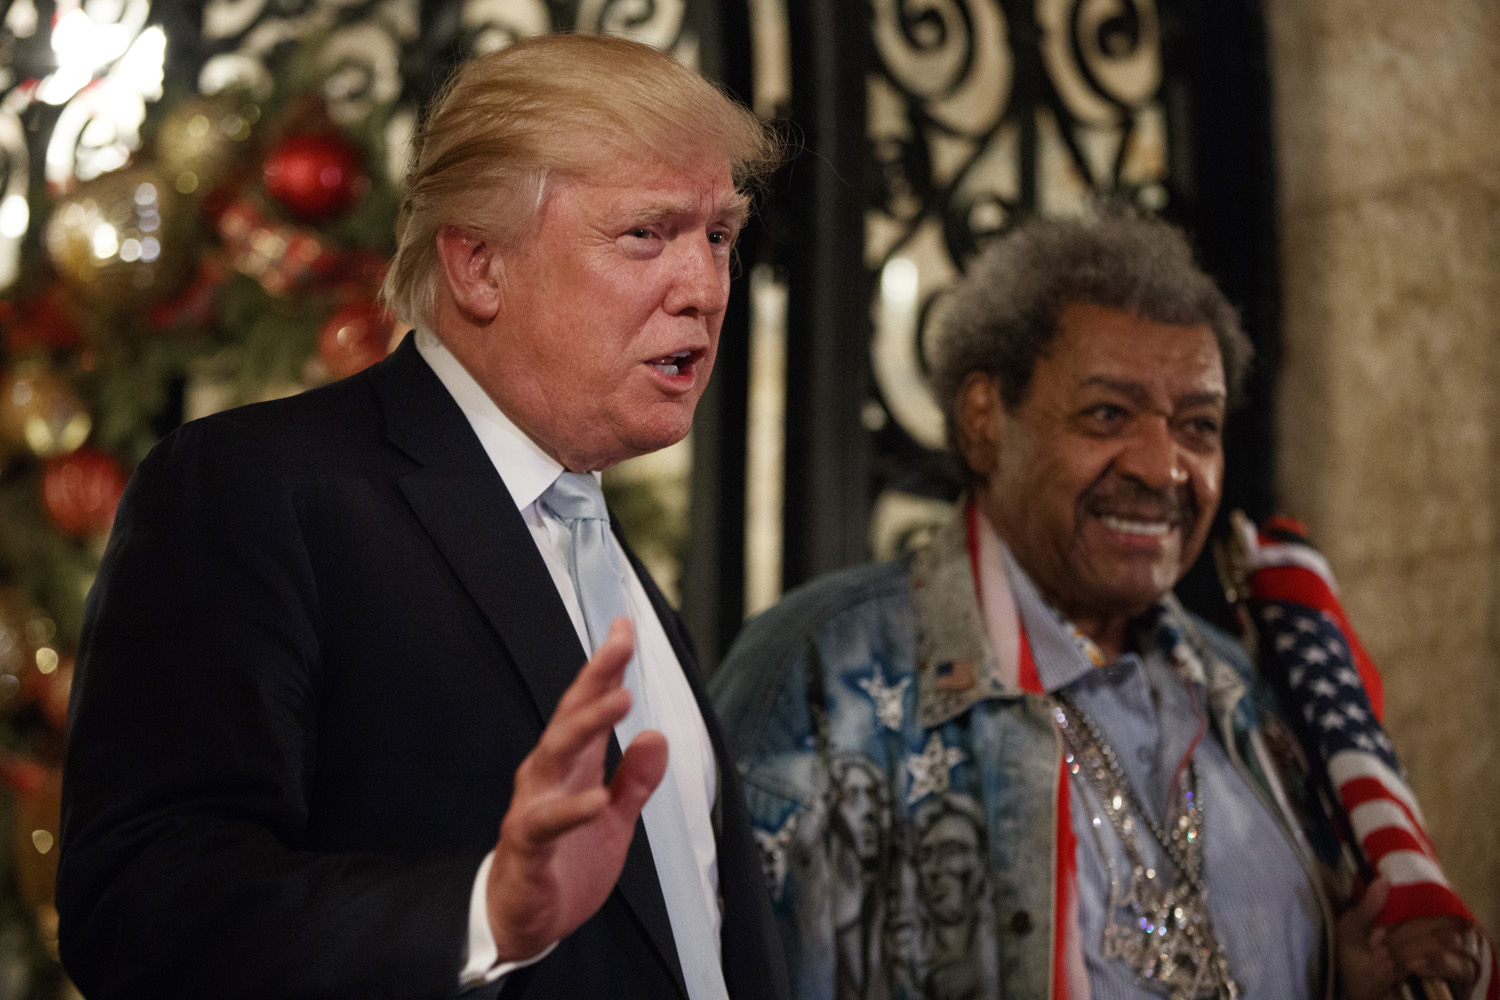 President-elect Donald Trump, left, stands with boxing promoter Don King as he speaks to reporters at Mar-a-Lago, Wednesday, Dec. 28, 2016, in Palm Beach, Fla. (Evan Vucci/AP)